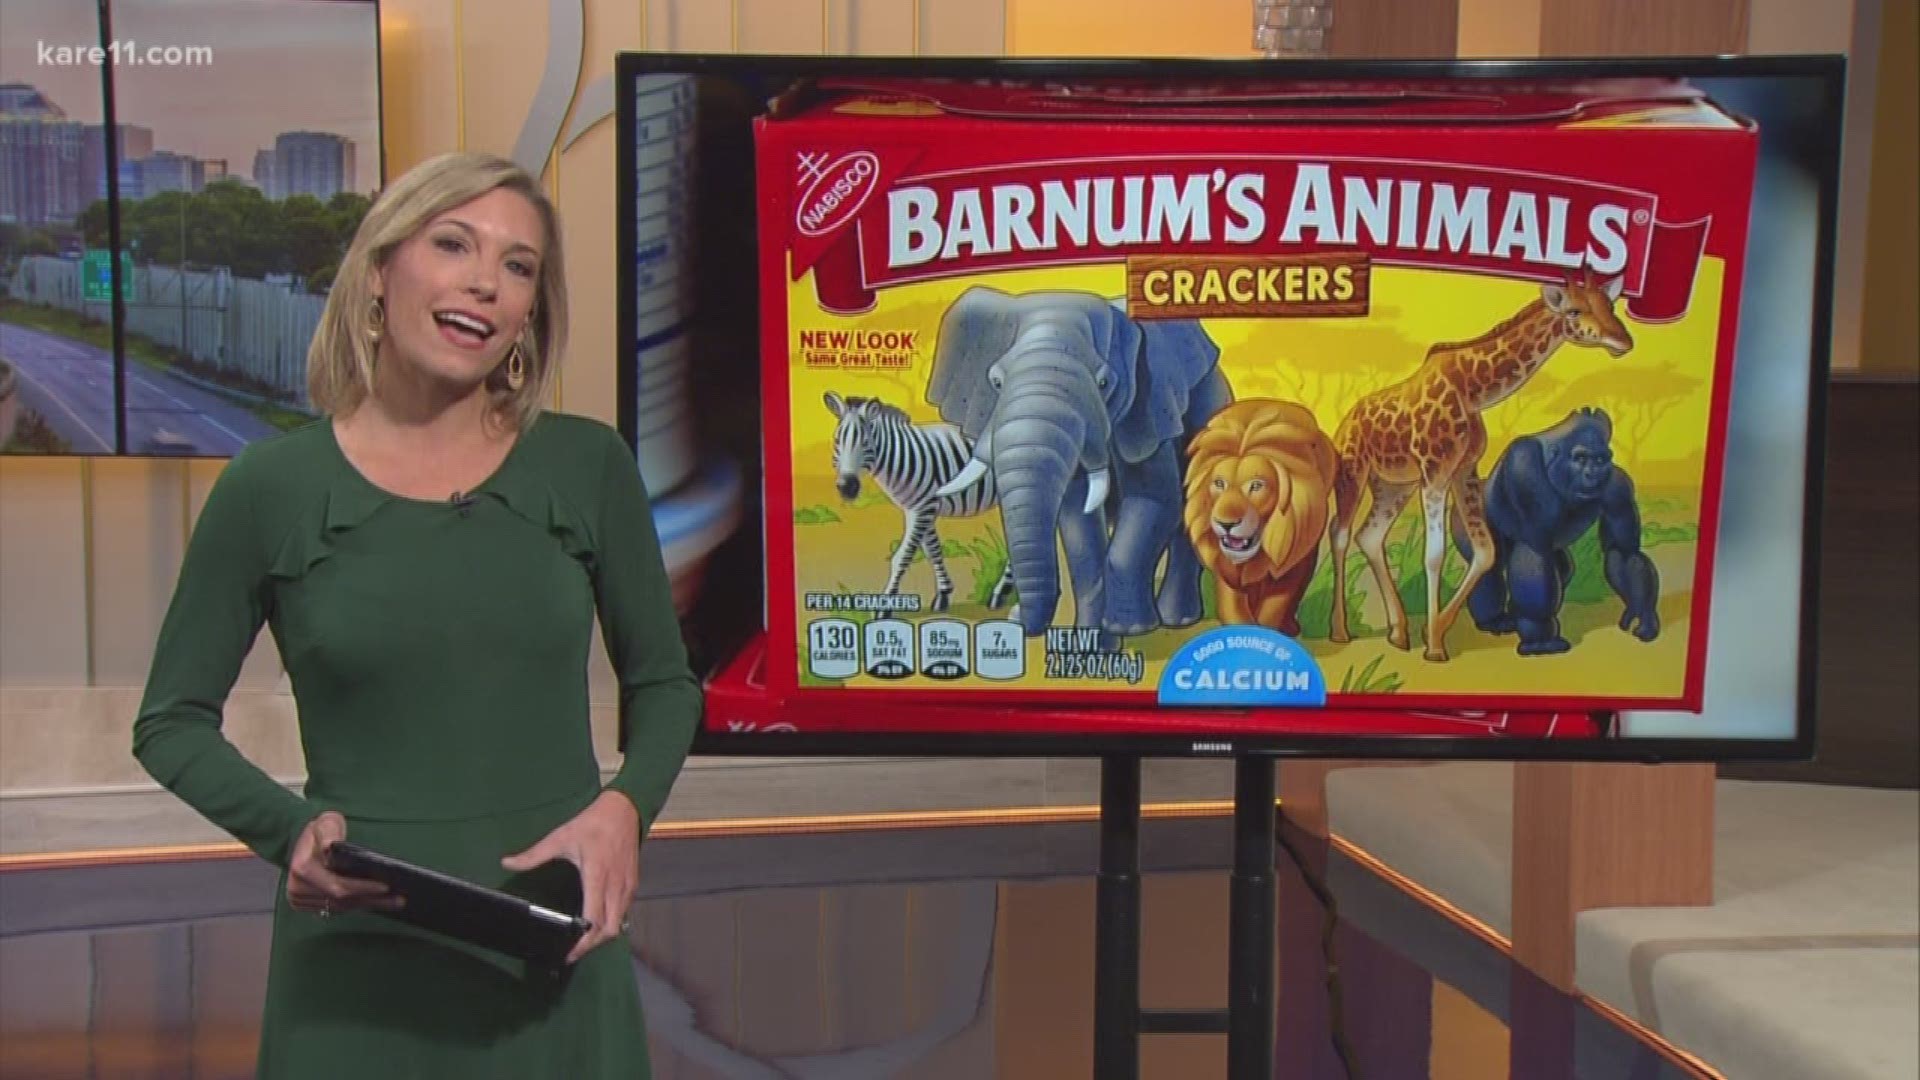 The packaging of Barnum's Animals crackers is getting a humane makeover, removing the depiction of the animals in cages. https://kare11.tv/2ML2N0i